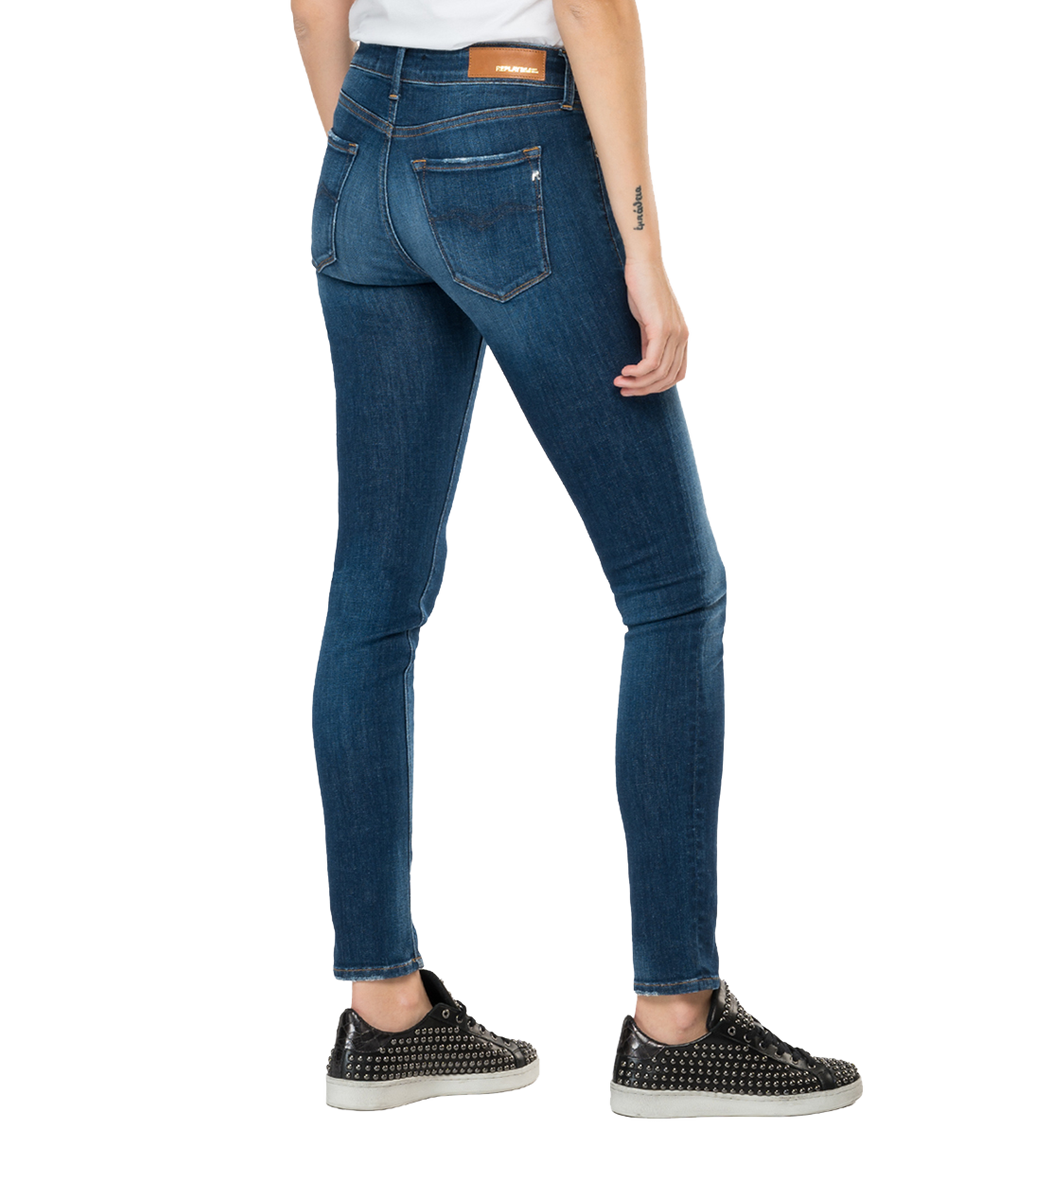 Skinny-Fit-New-Luz-Jeans-Medium-Blue-Wh689-.000.69D-901-009 – Replay ...